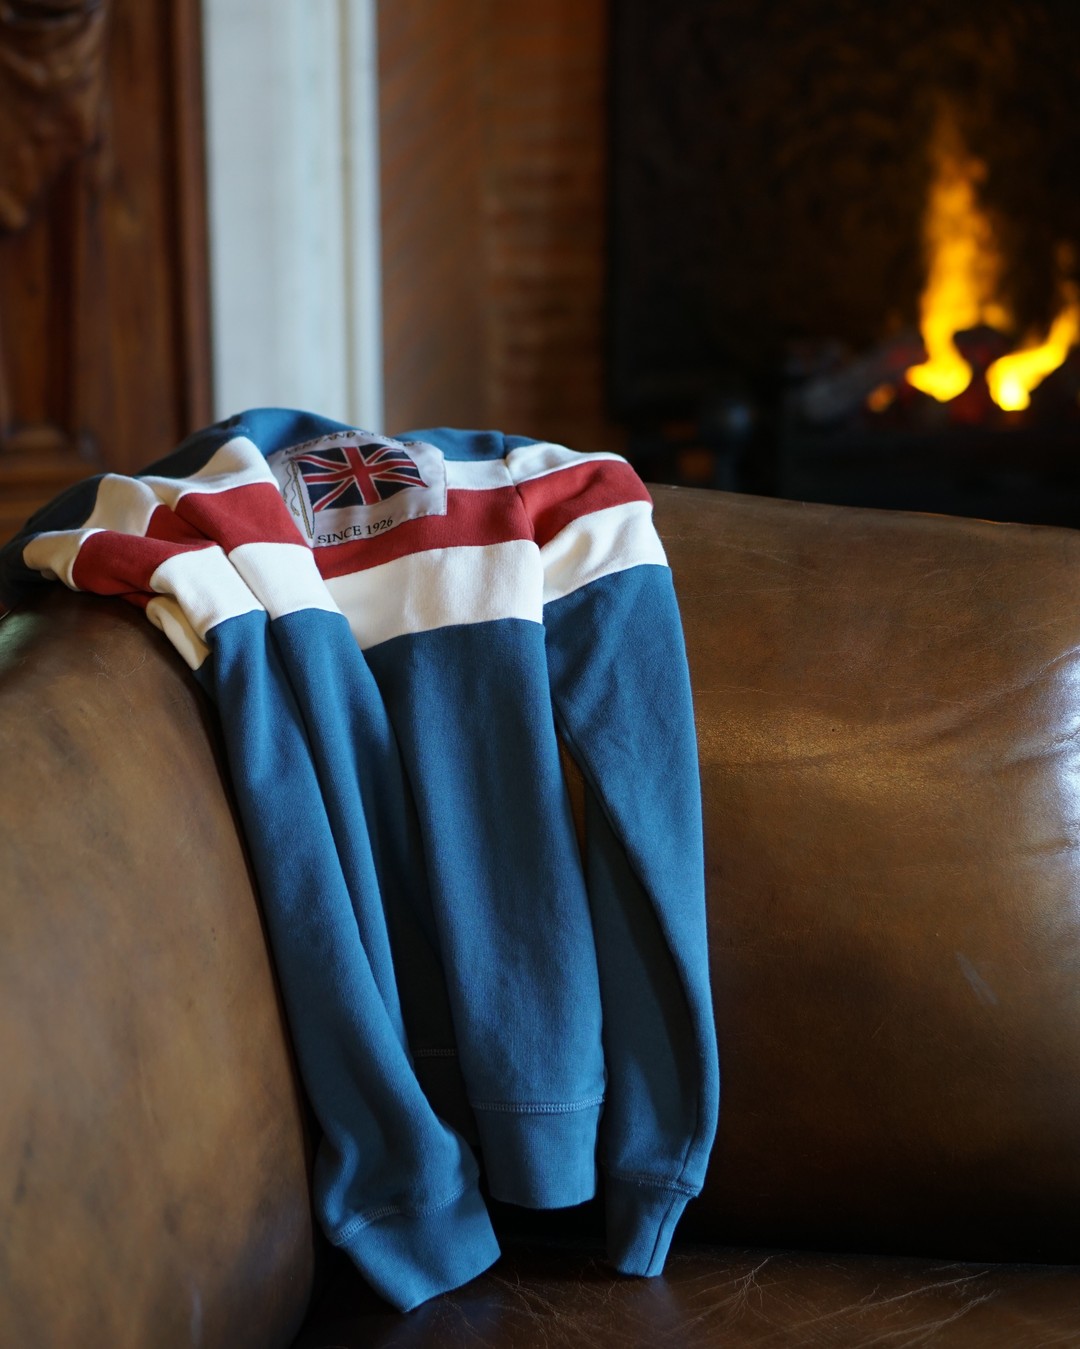 Our classic fit sweatshirt knitted with two thick racing stripes in ecru and red on a vintage blue ground, and finished with our archive woven Union Flag patch.